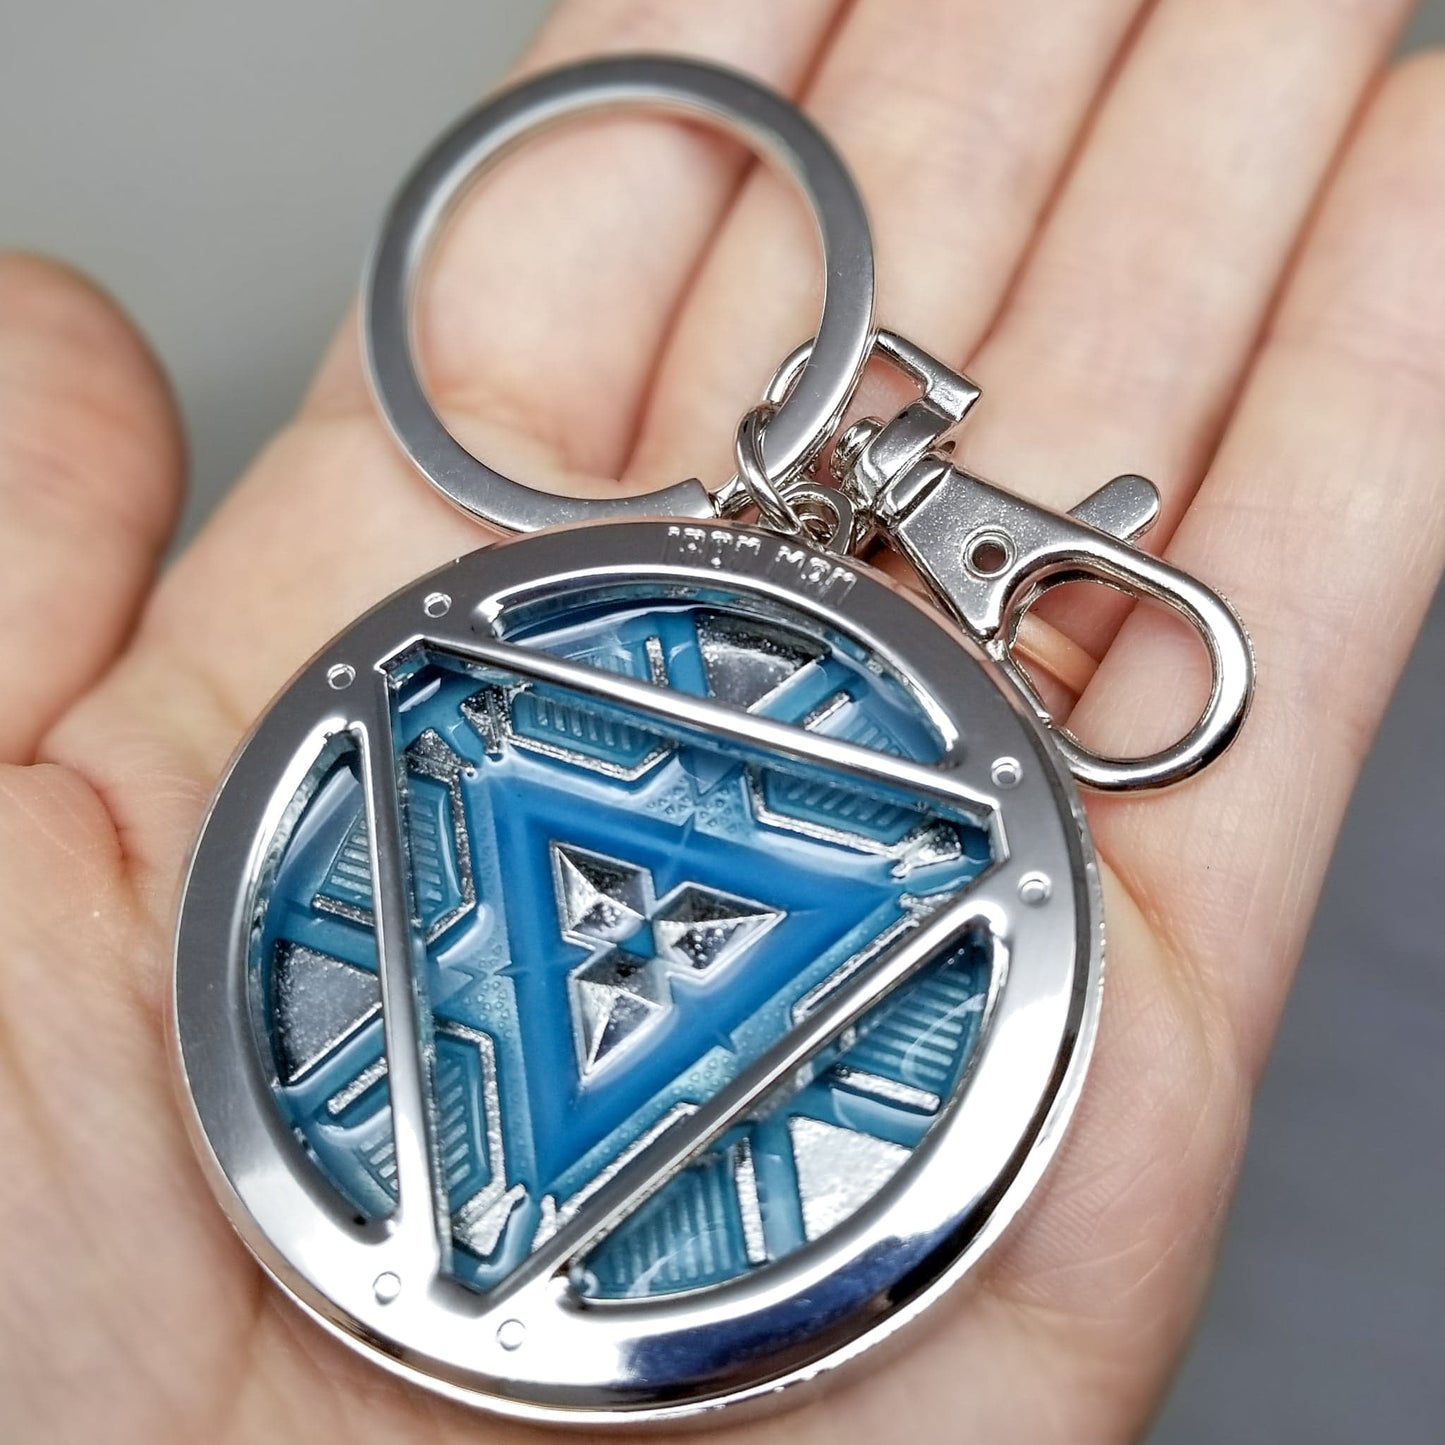 Iron Man Glow-In-The-Dark Pewter Arc Reactor Keychain.  In Celebration of Tony Stark’s Iron Man as seen in the Marvel Studios Avengers films, this oversize pewter Arc Reactor glow-in-the-dark metal keychain features the Arc Reactor powering Tony’s chest and power suit in Iron Man 3.  2 inches across & nearly 1/2 inch thick!  Features “Iron Man” logo on the back Includes stainless steel keyring and clip Blue Glow-in-the-Dark effect!  Carry your own Proof that Tony Stark Has a Heart